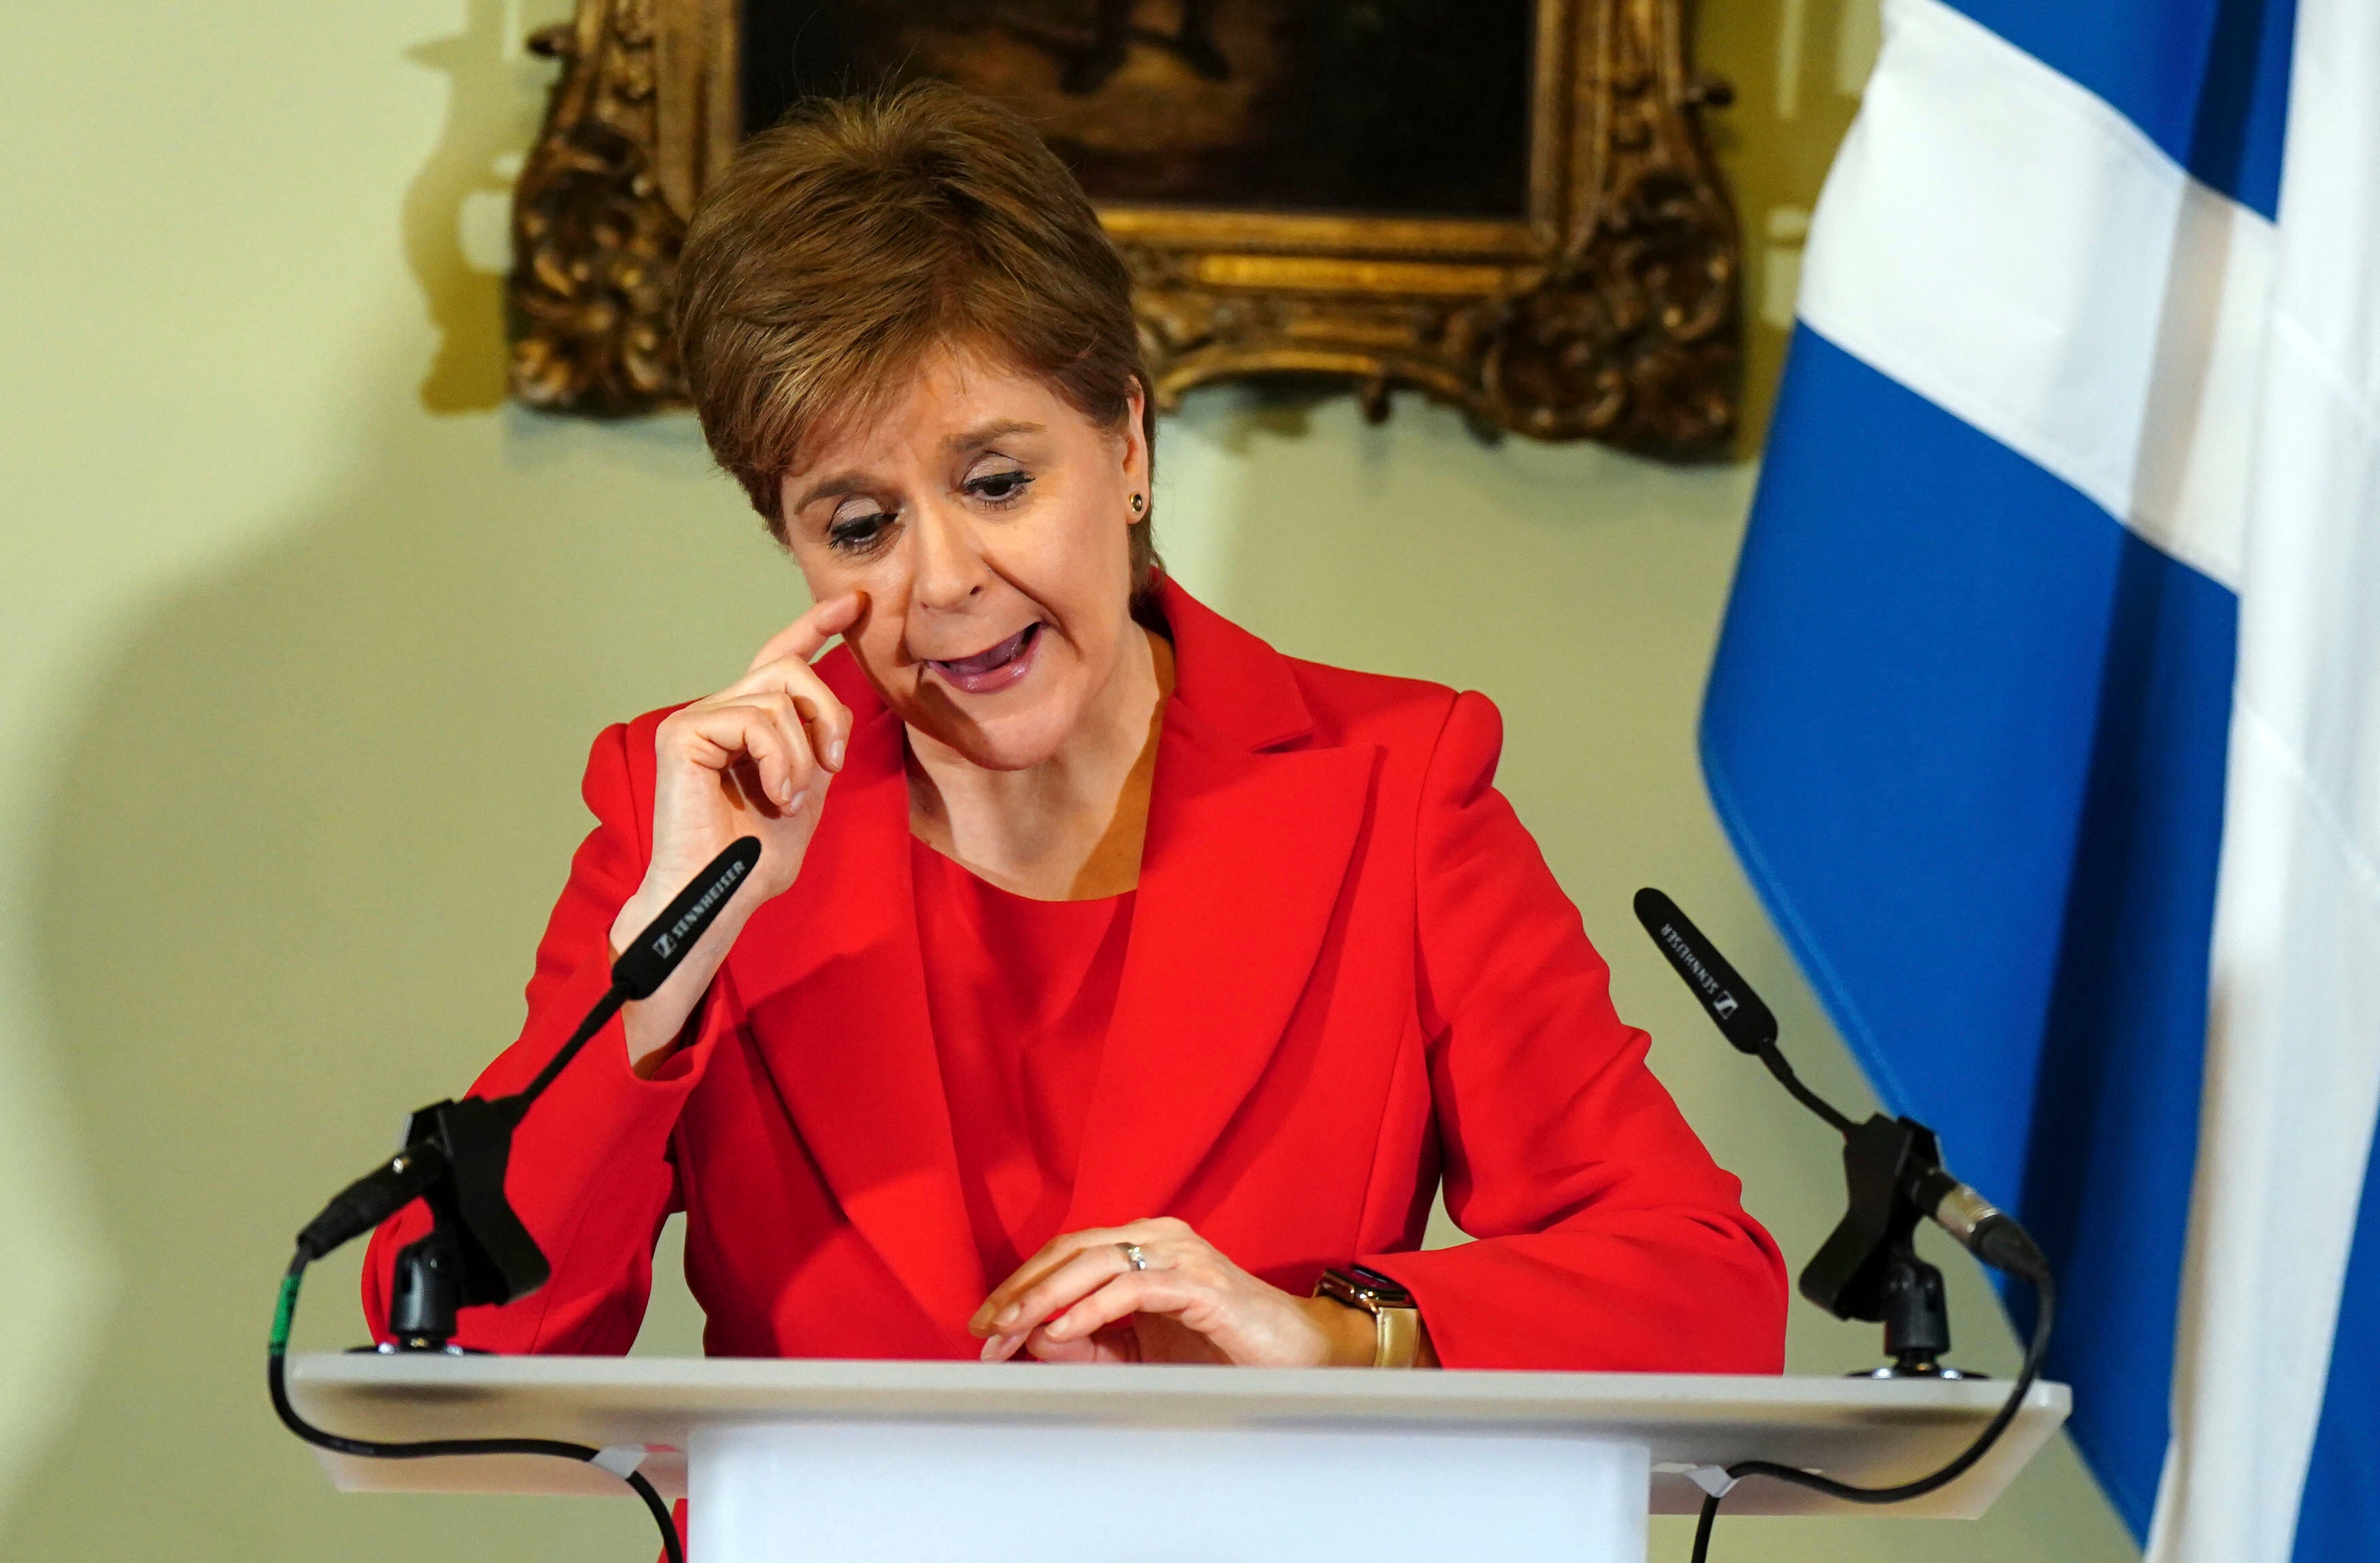 Nicola Sturgeon announced she would be resigning on Wednesday